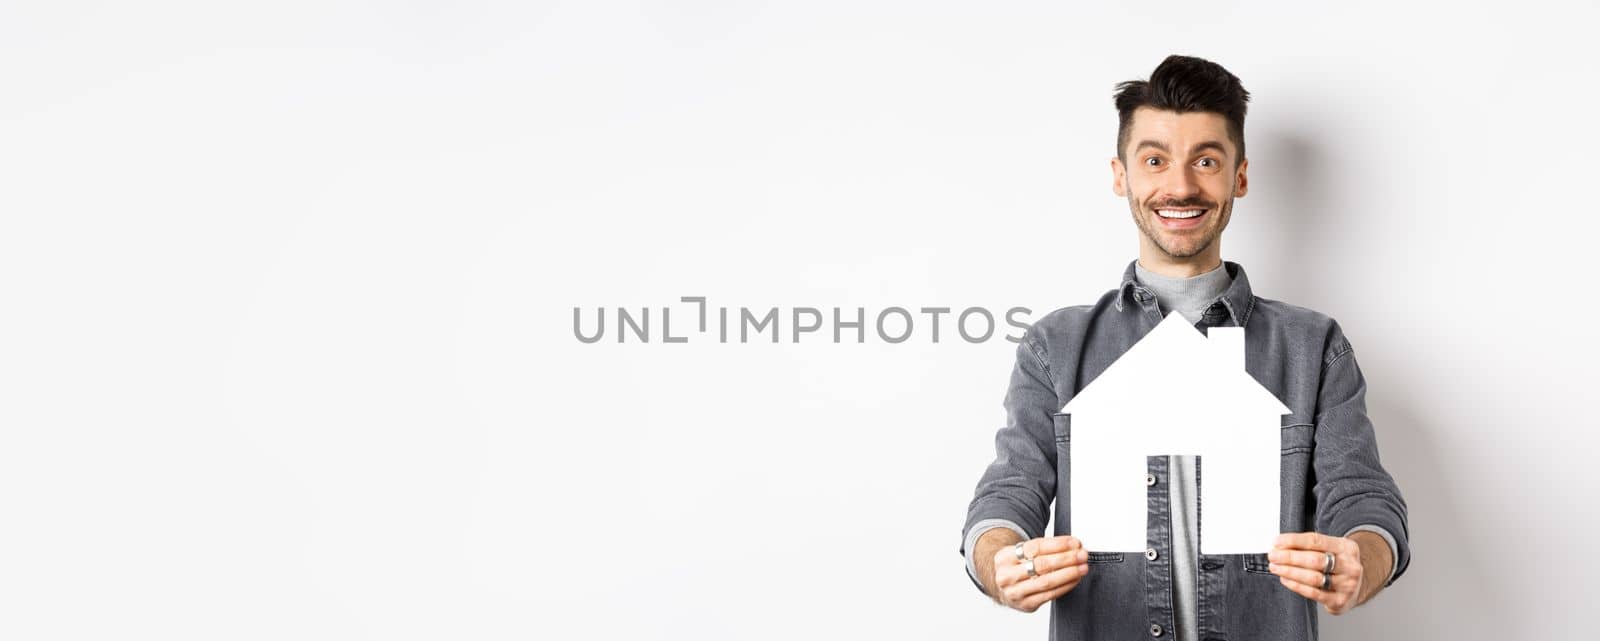 Real estate and insurance concept. Handsome young guy showing paper house cutout and smiling, searching for apartment, buying property, standing against white background.